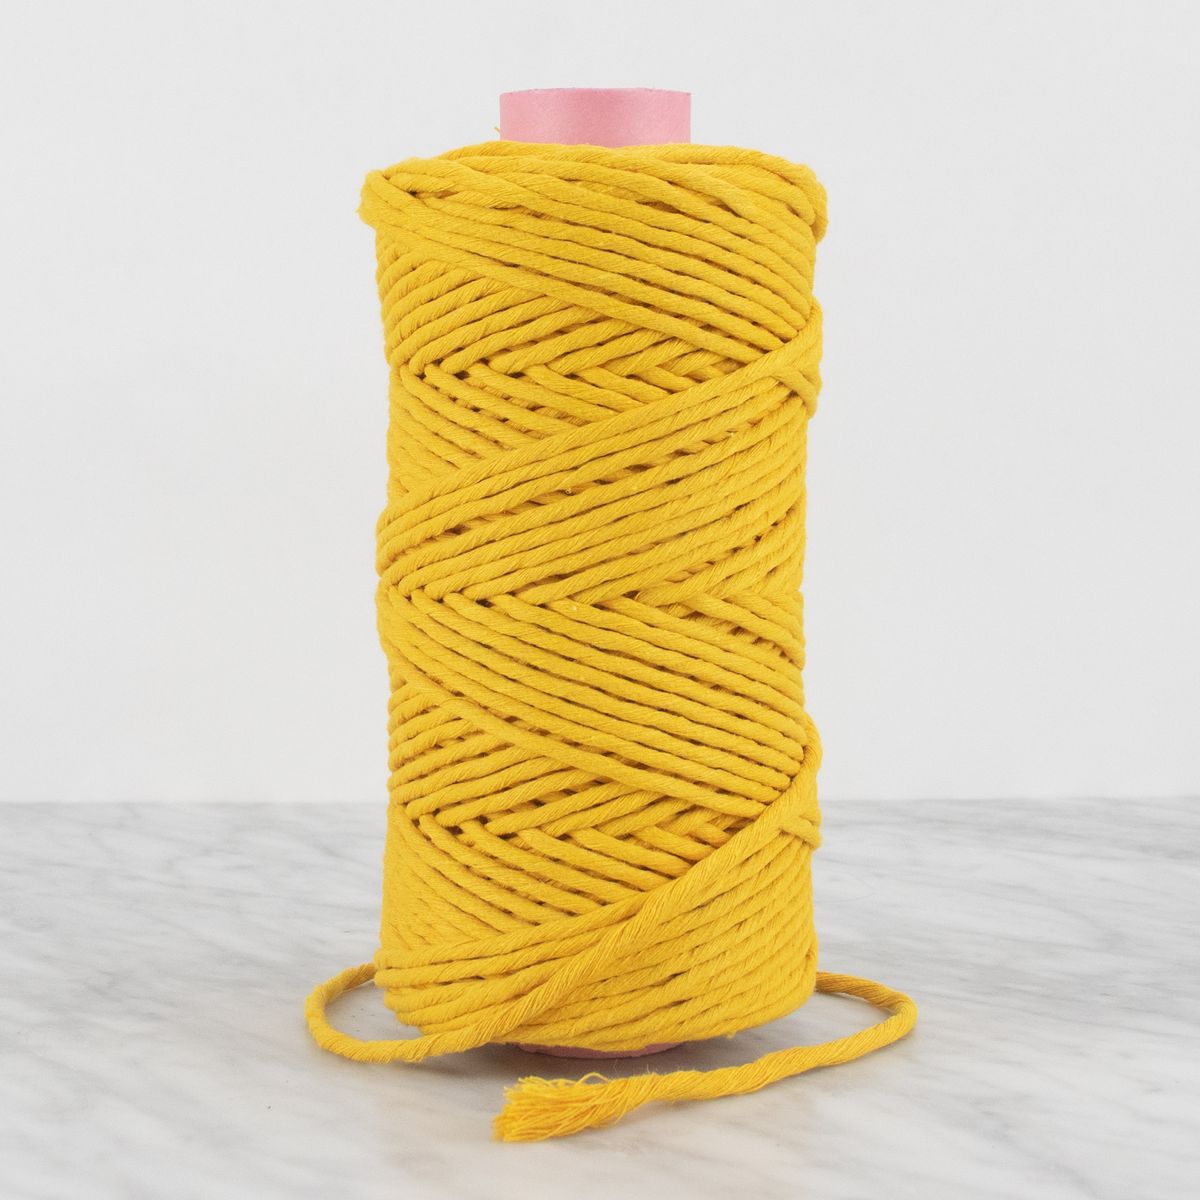 5 mm Recycled Cotton String 0.5 kg - Sun